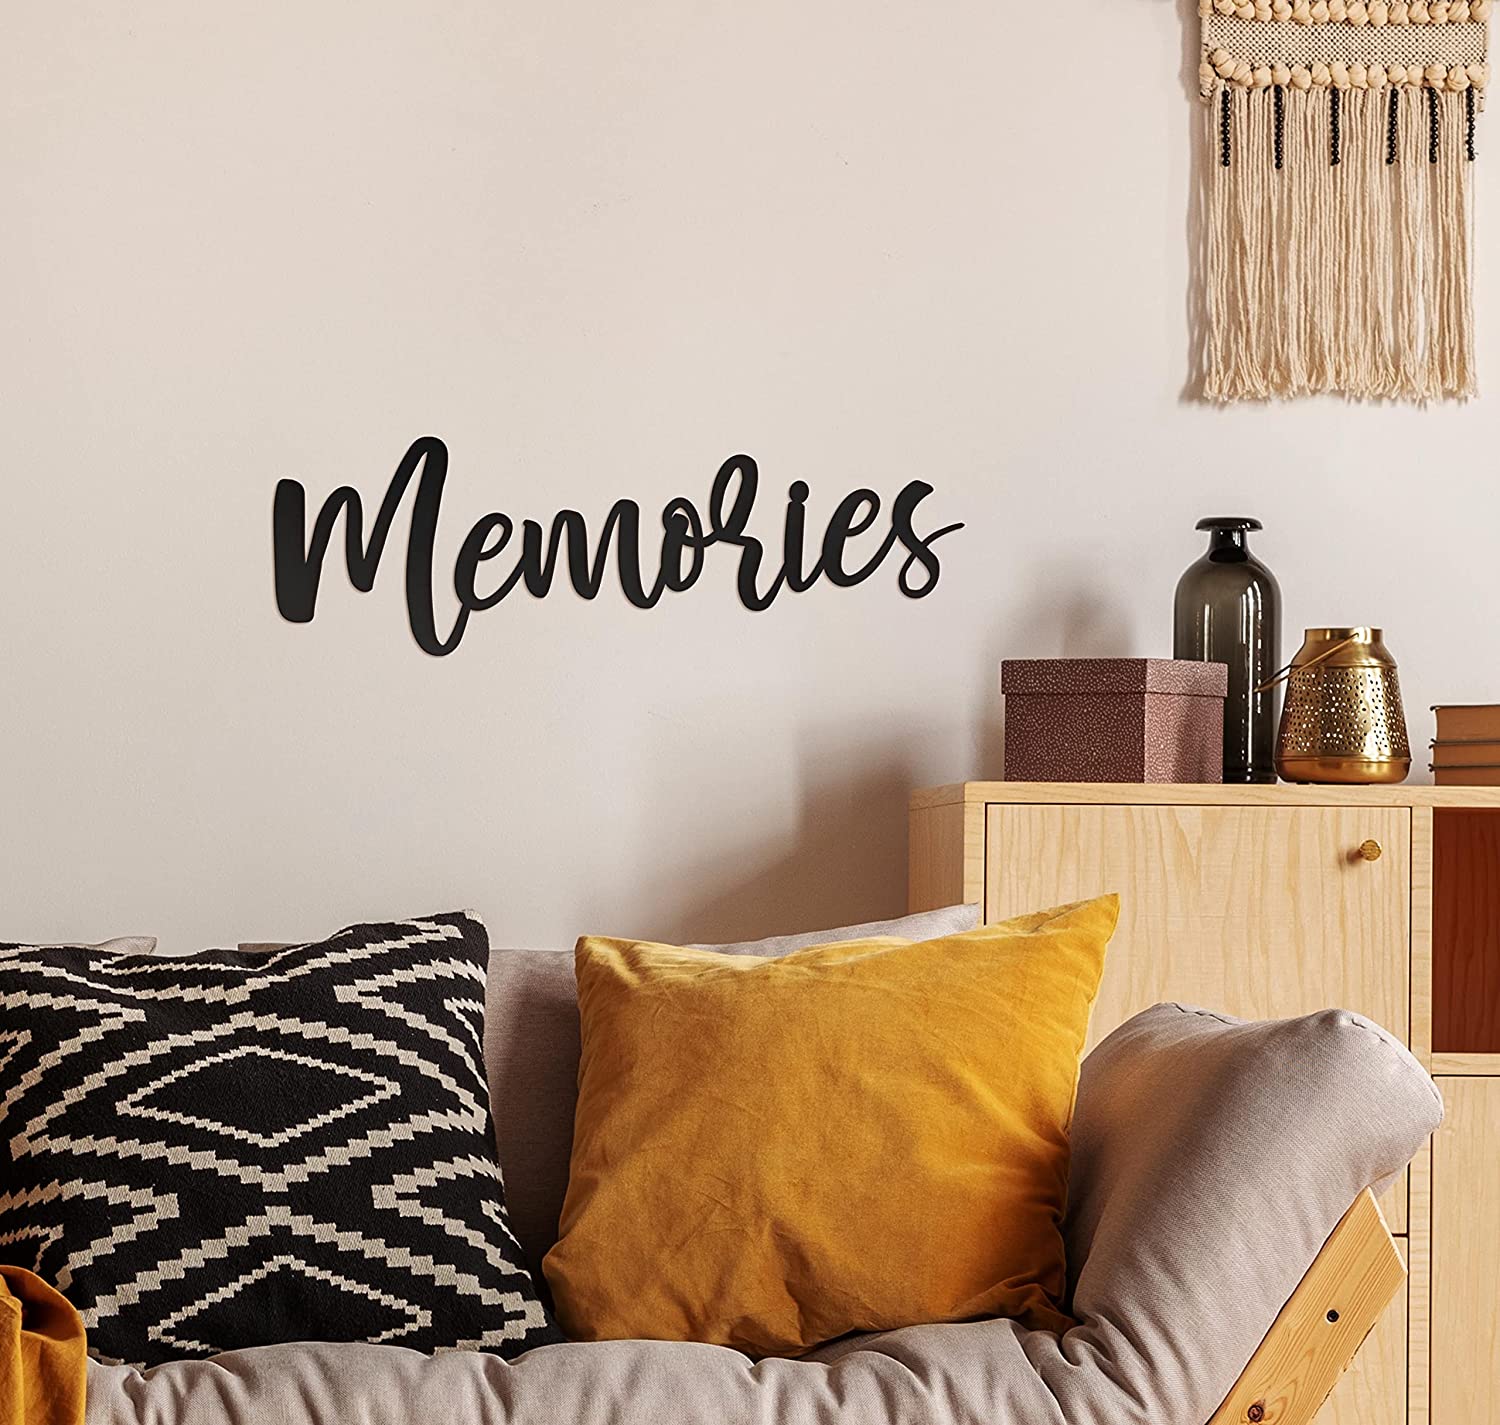 Memories Wall Decor Metal Art Piece - 17"X5" Memories Sign Metal Cut Out Signs From Durable Powder-Coated Metal, Perfect for Home Wall Decor Signs In Rustic Wall Decor